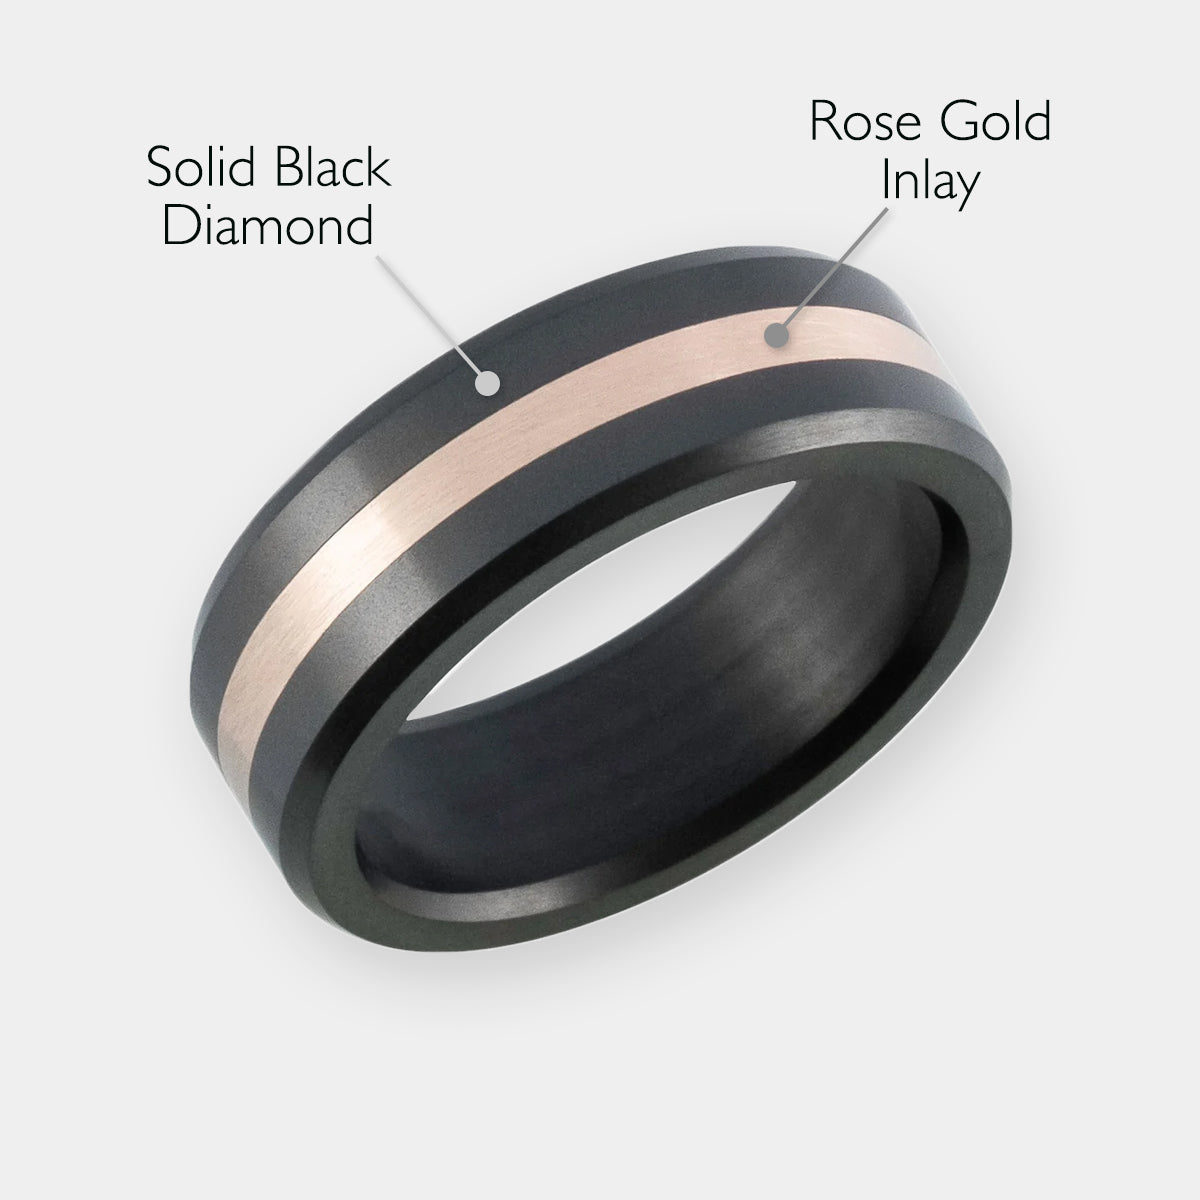 Men's Black Diamond & 18k Rose Gold Inlay with material descriptions listed | Elysium ARES | Men’s 18k Rose Gold Rings | 18k Rose Gold Inlay Wedding Ring